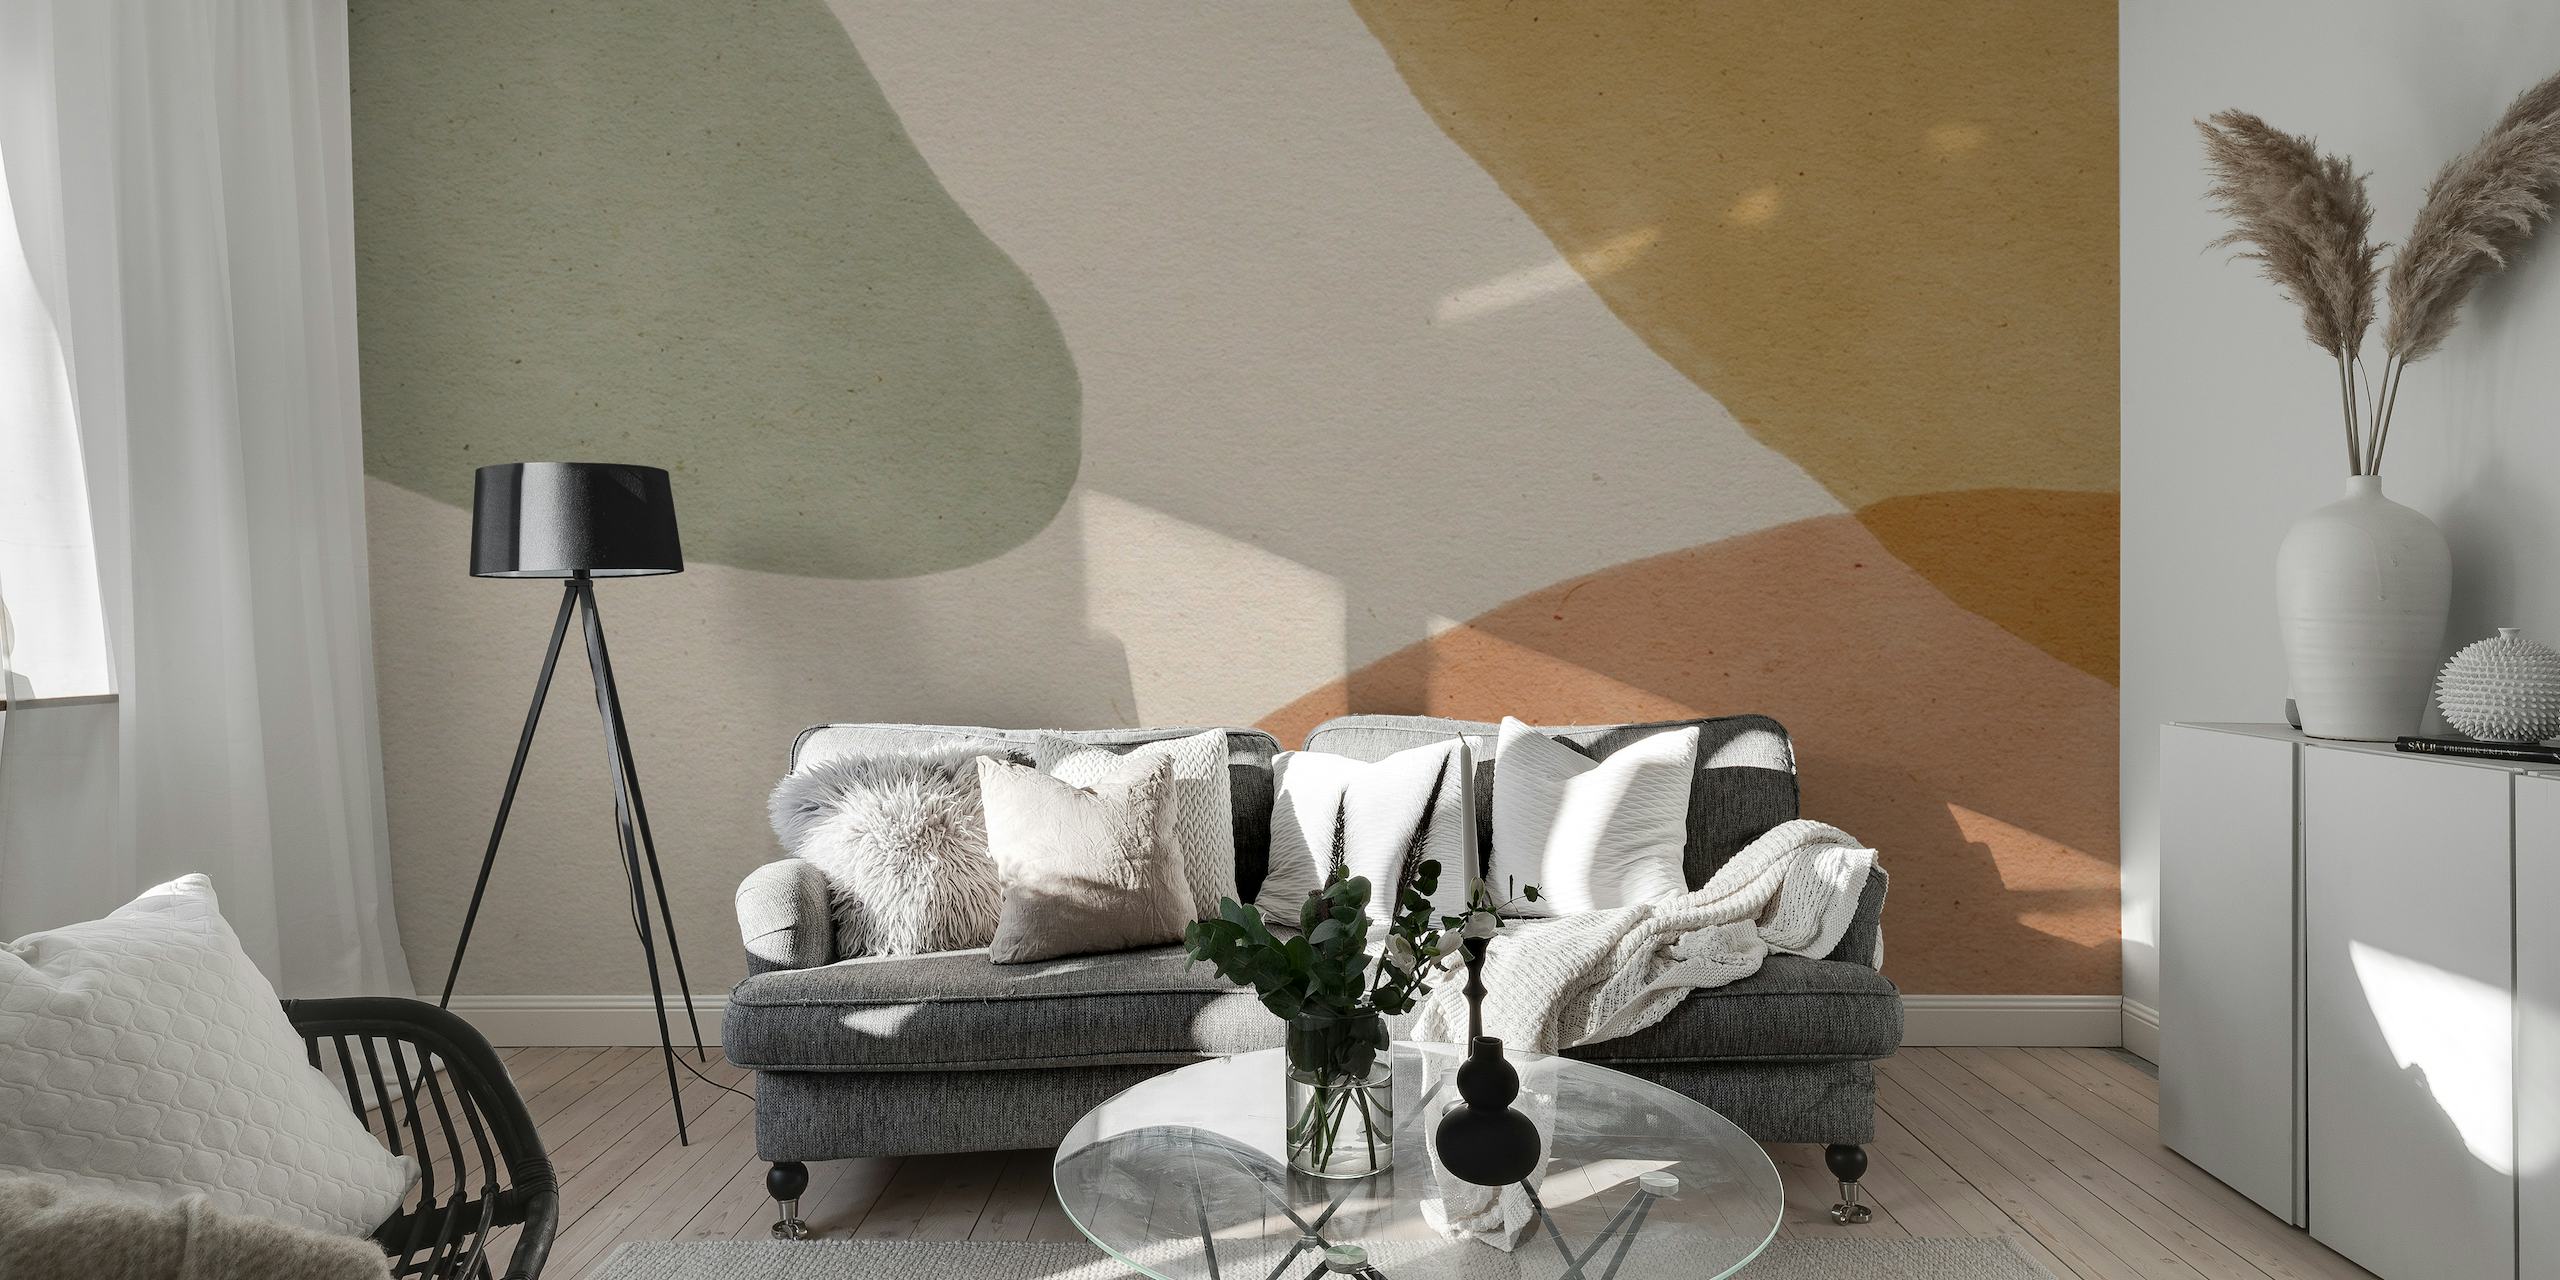 Equinox wall mural with earthy tones and abstract shapes